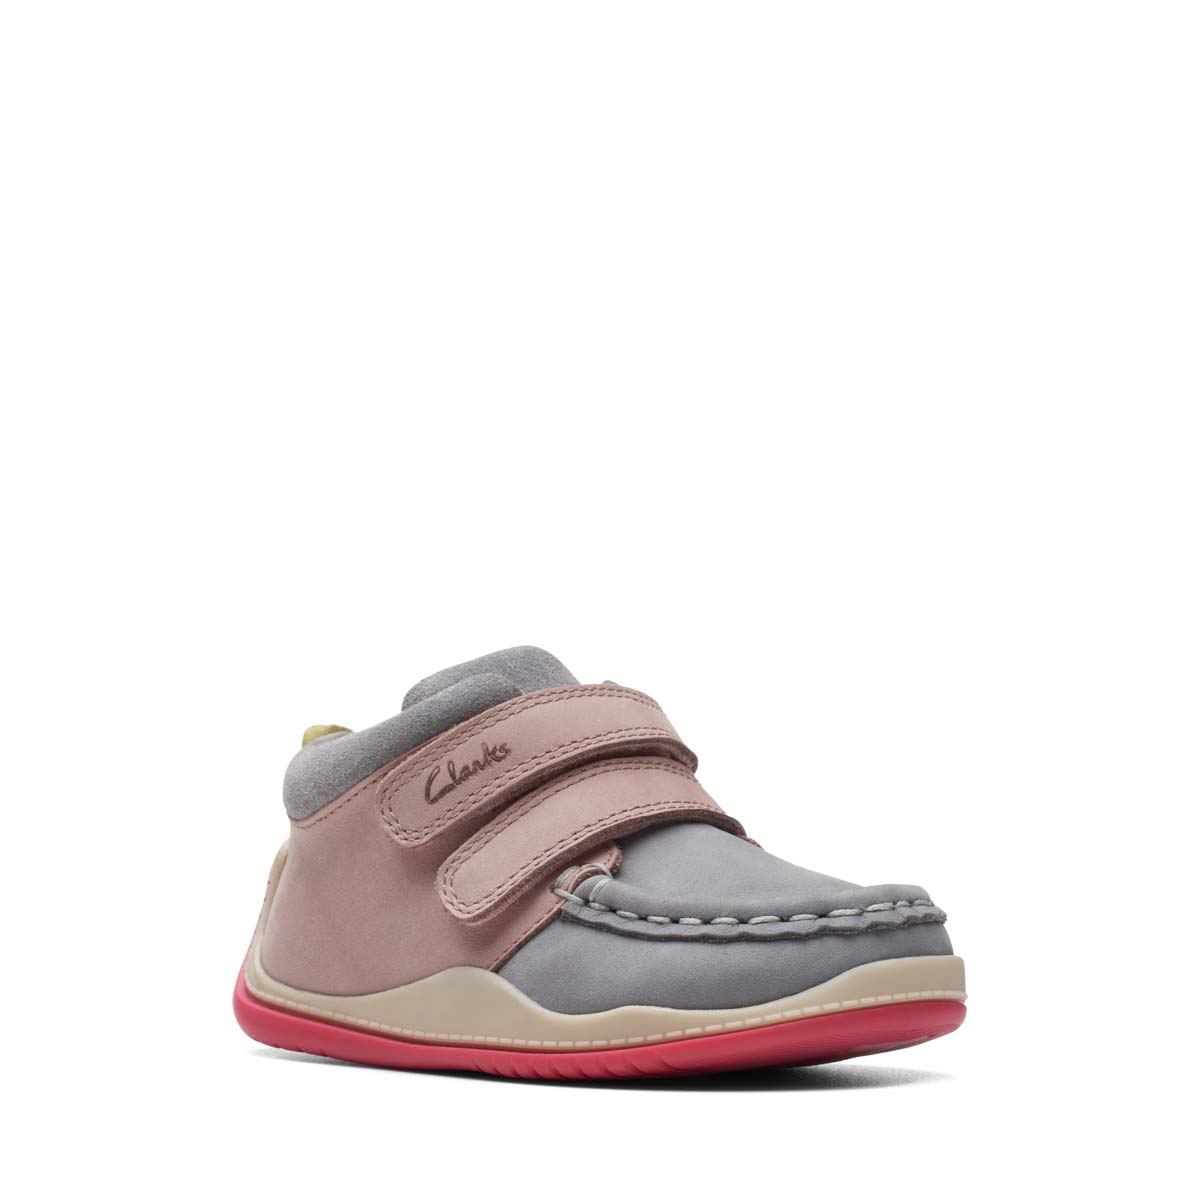 Clarks Noodle Play 2v Grey Pink Kids Toddler Girls Boots 7531-96F in a Plain Leather in Size 4.5